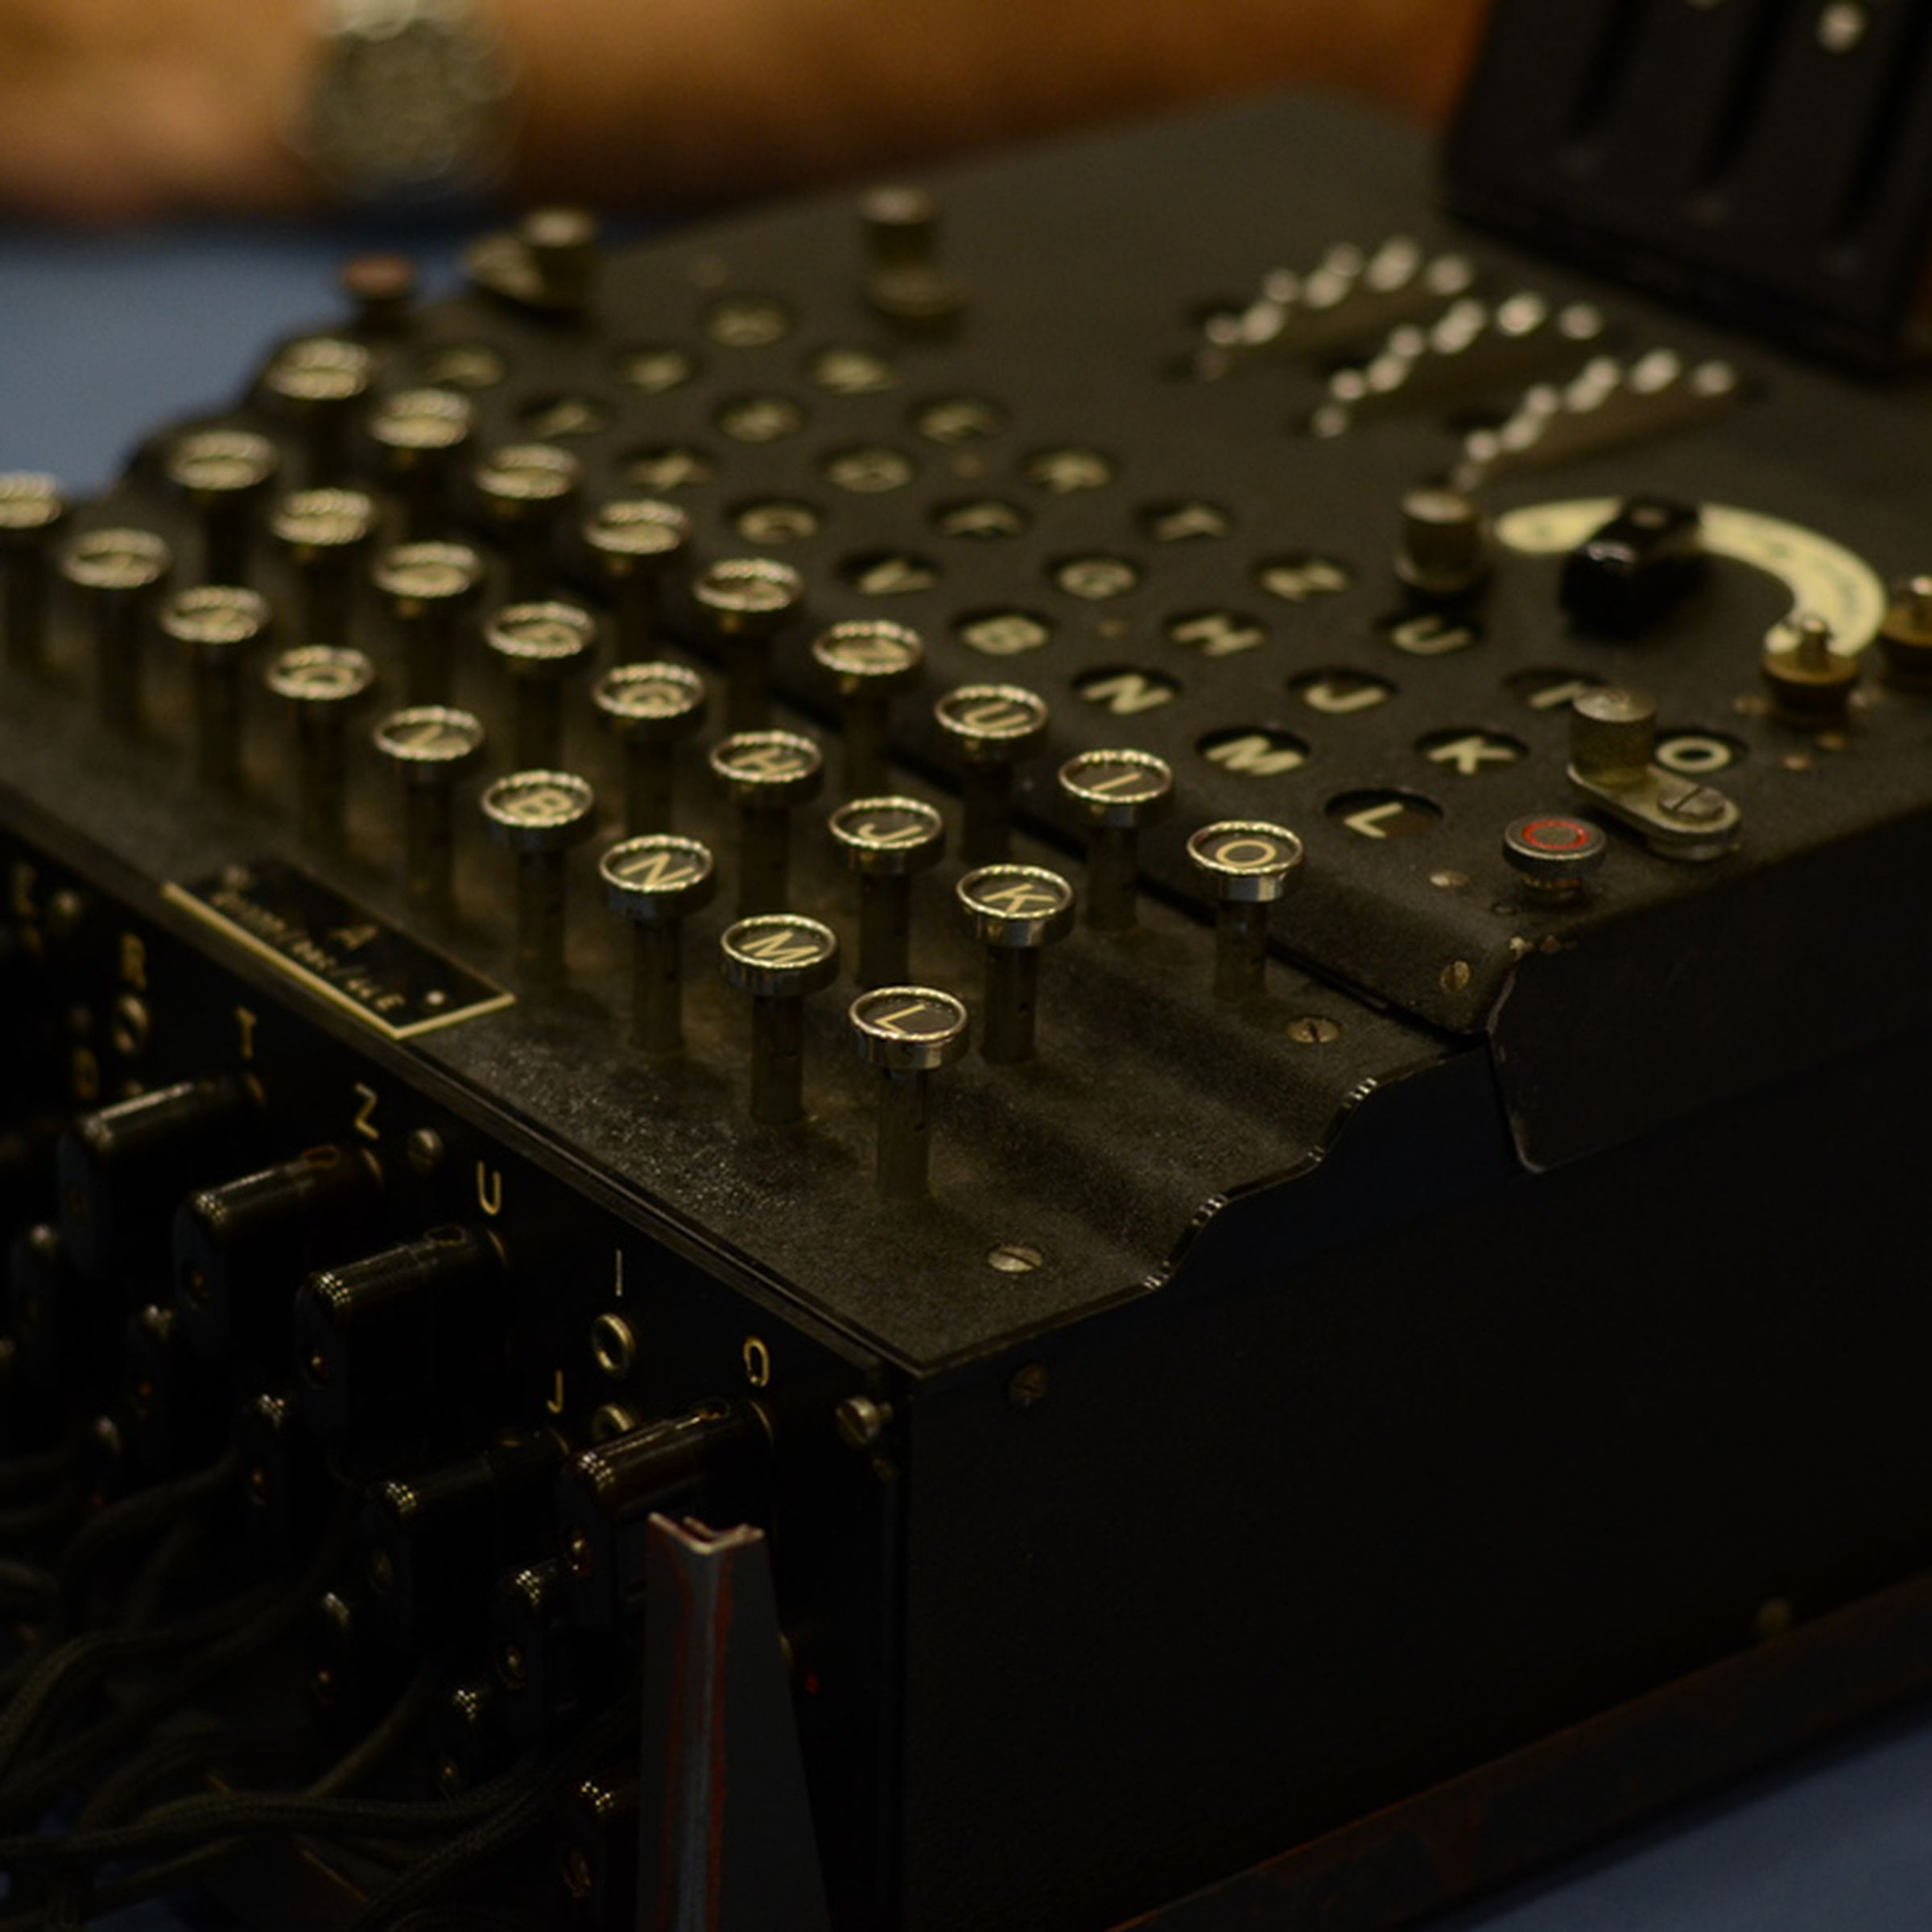 The Enigma machine makes an appearance to help the NSA's recruitment efforts at Def Con